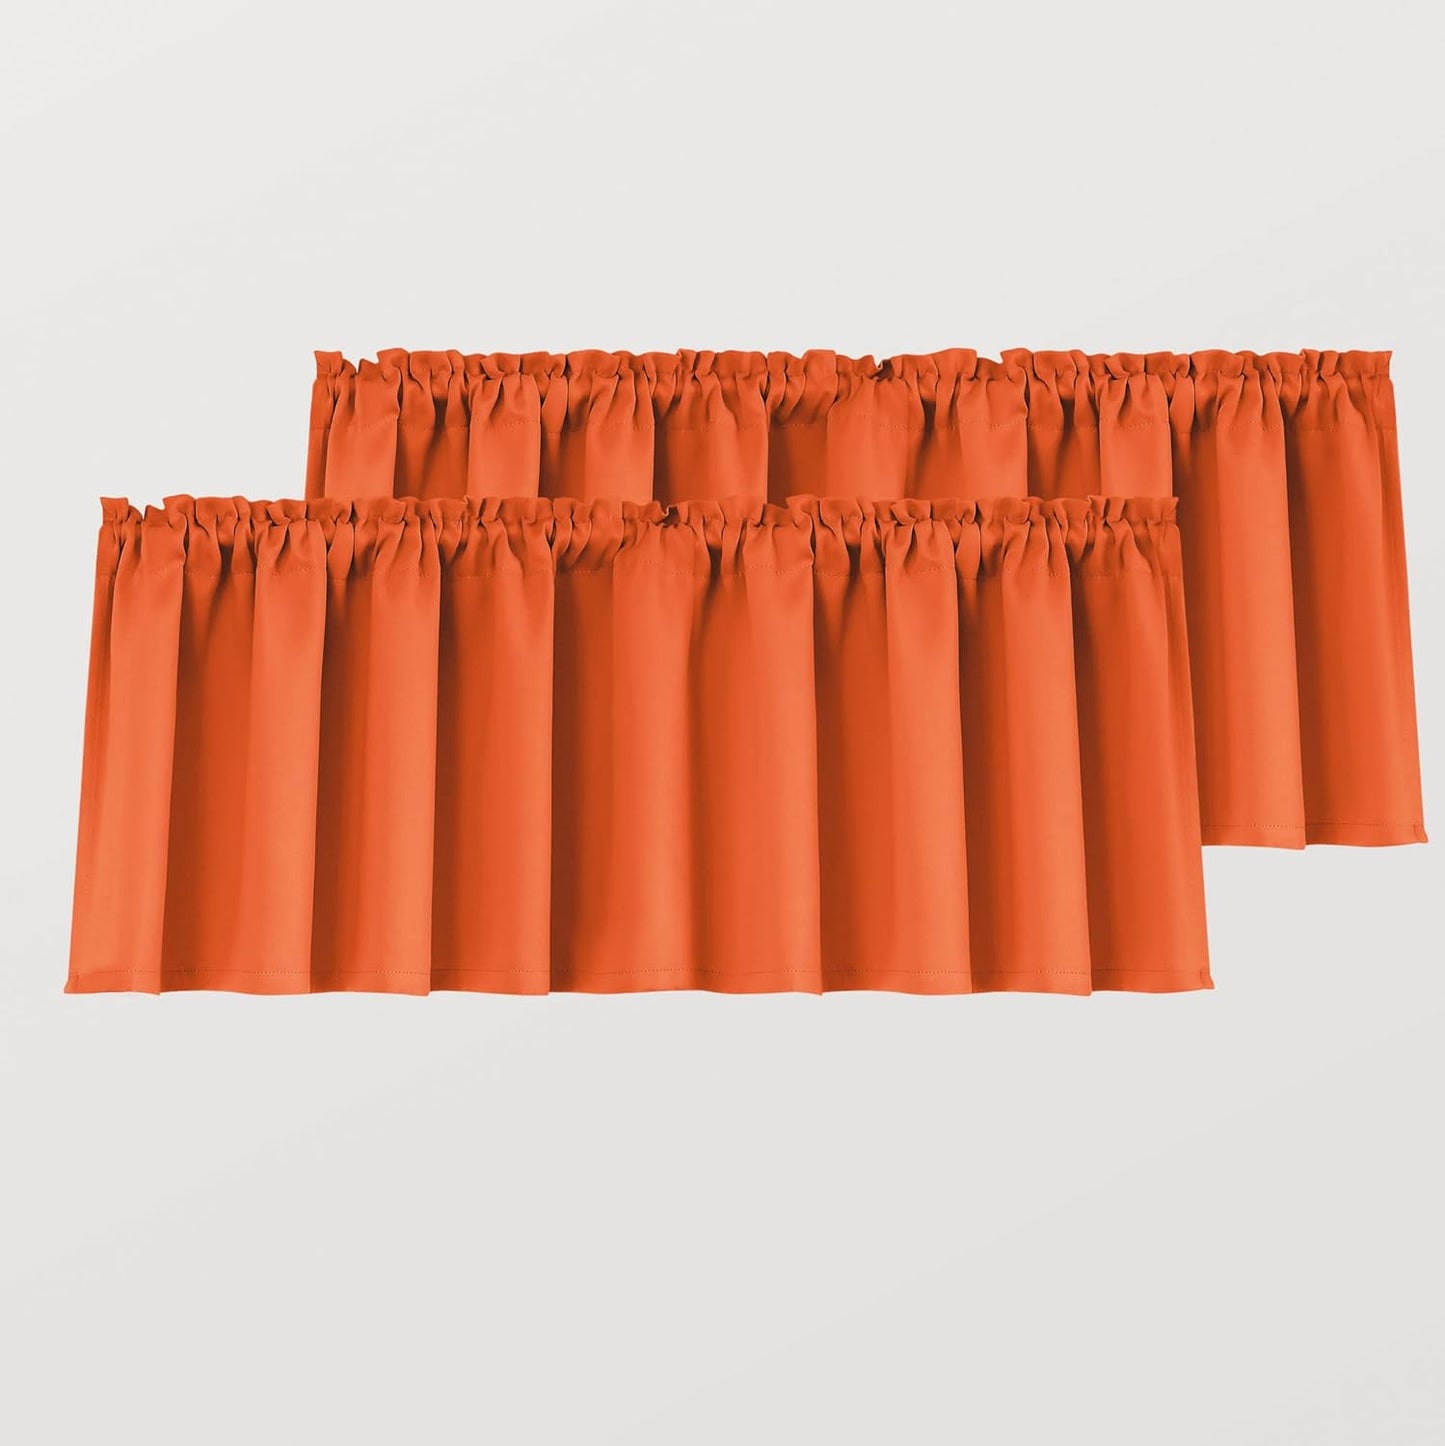 Mrs.Naturall Beige Valance Curtains for Windows 36X16 Inch Length  MRS.NATURALL TEXTILE Burnt Orange 36X16 